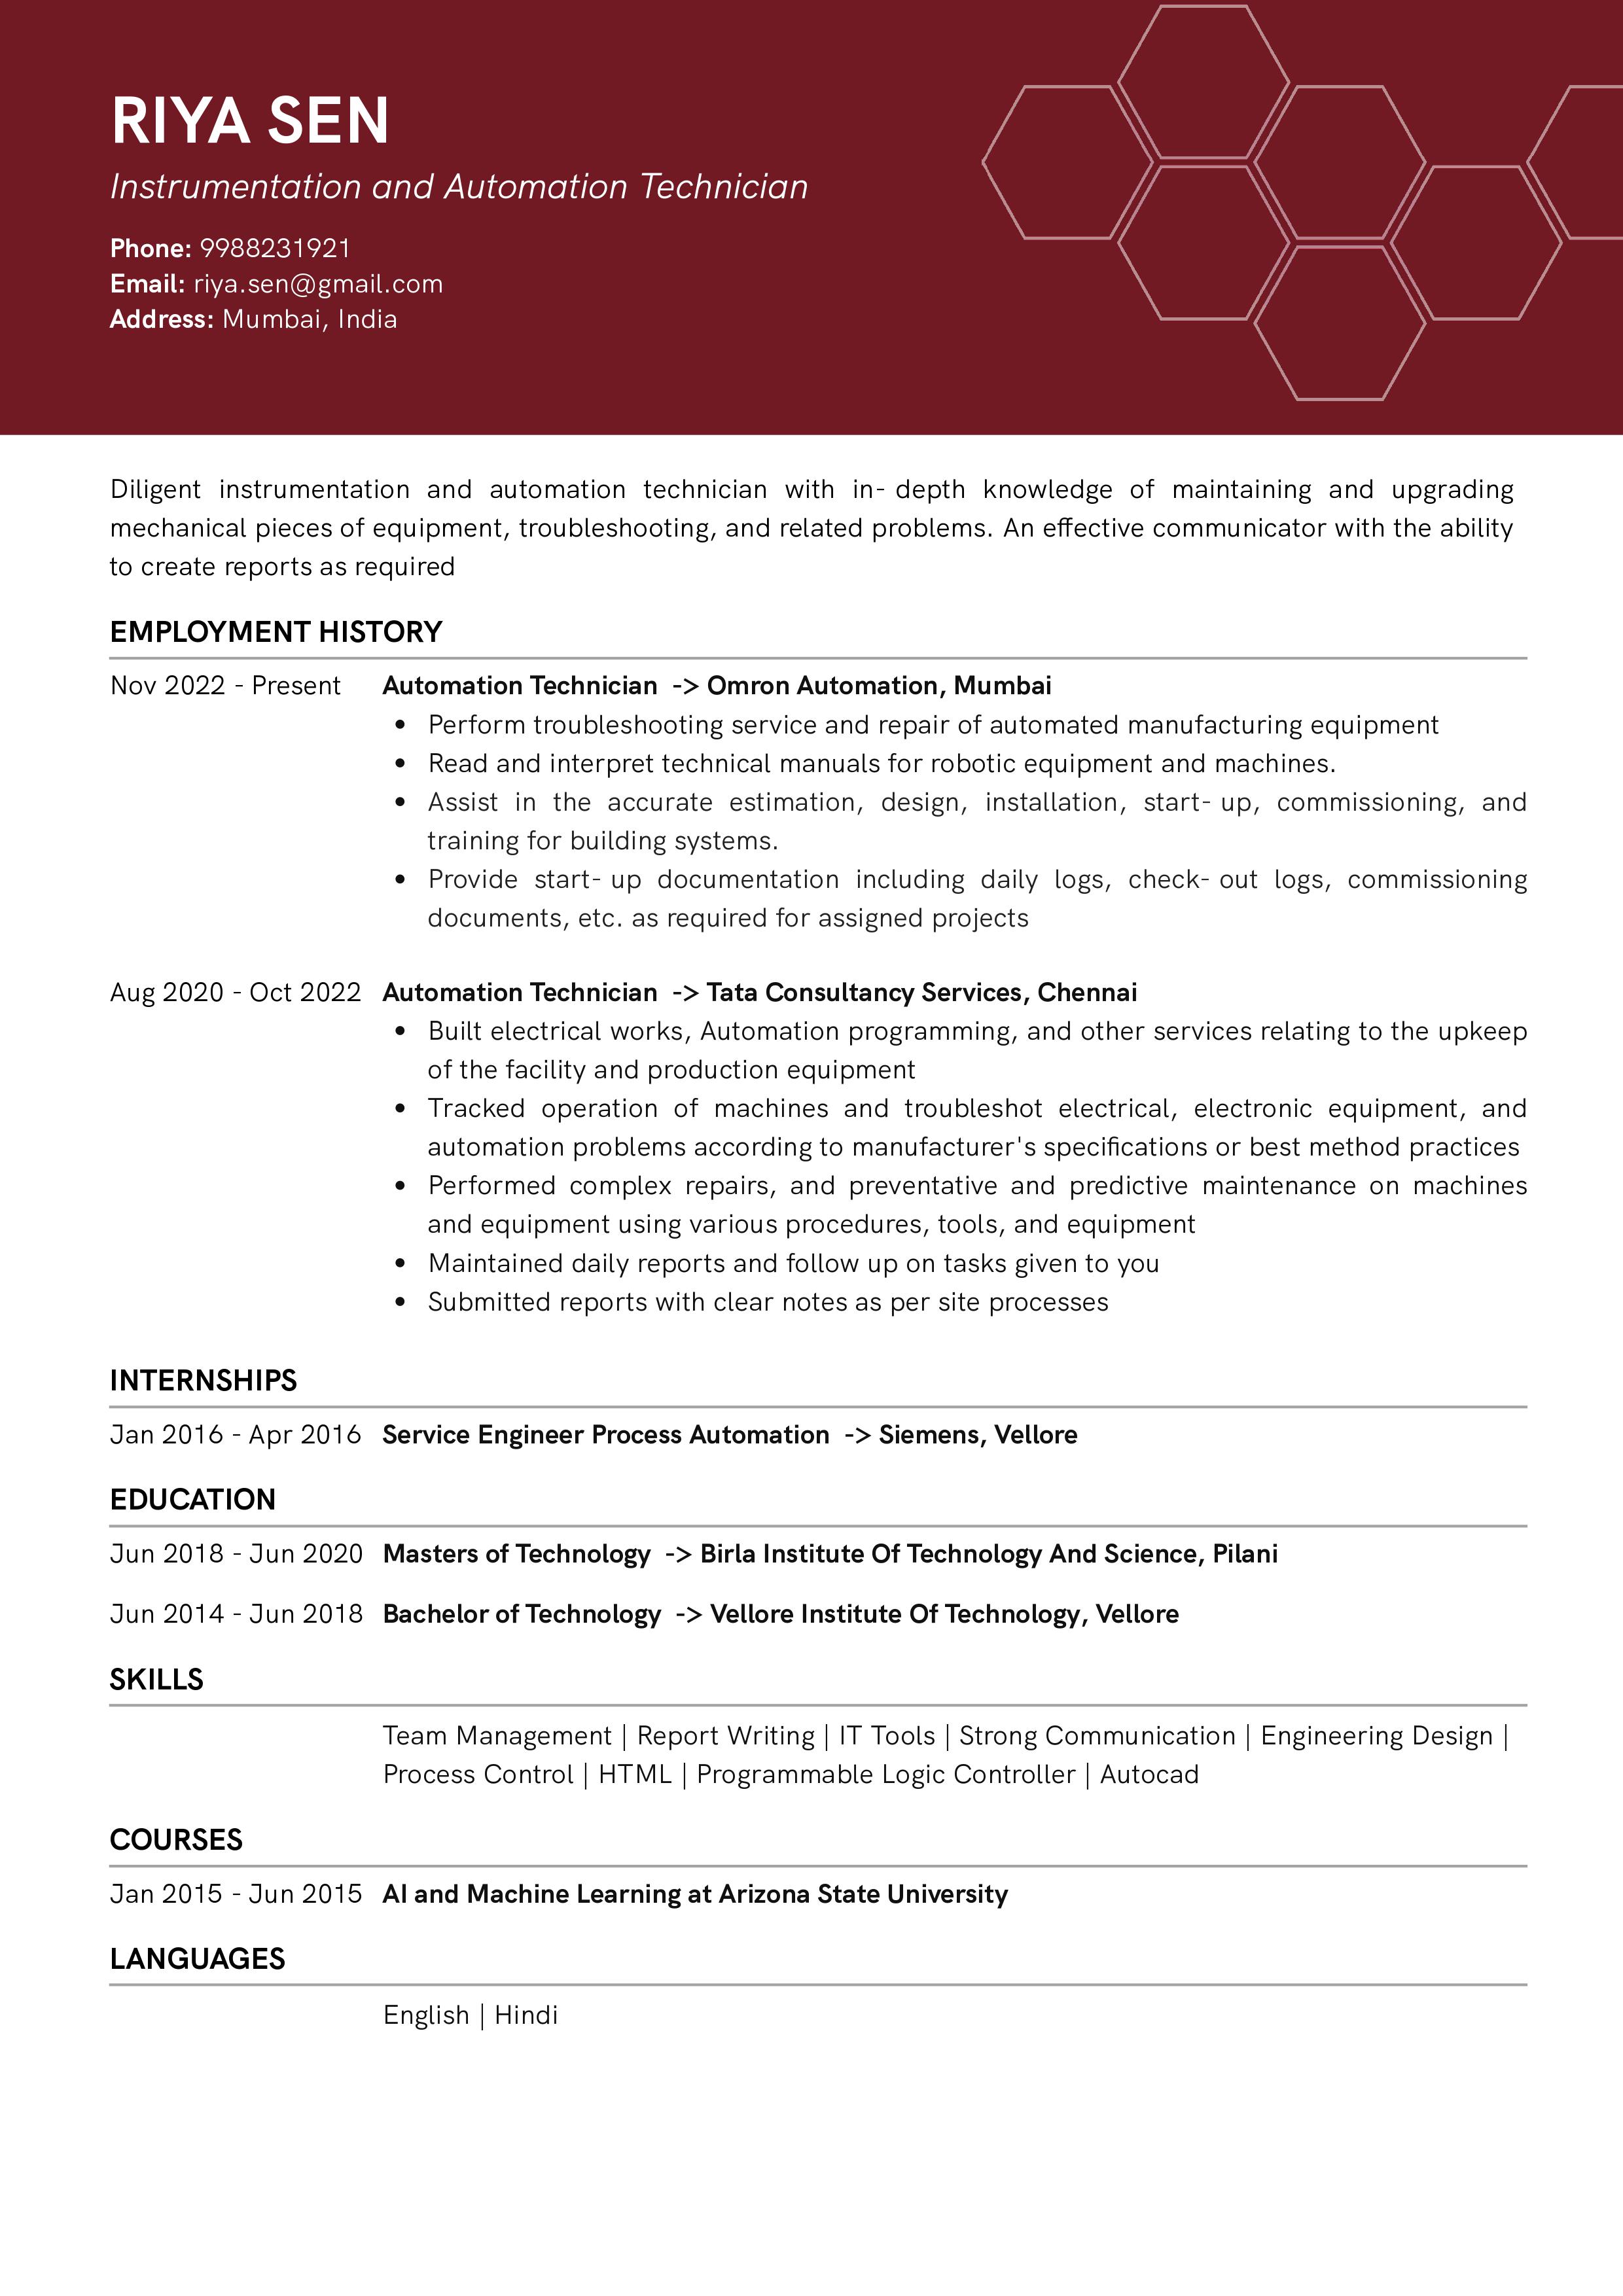 Sample Resume of  Instrumentation and Automation Technician | Free Resume Templates & Samples on Resumod.co